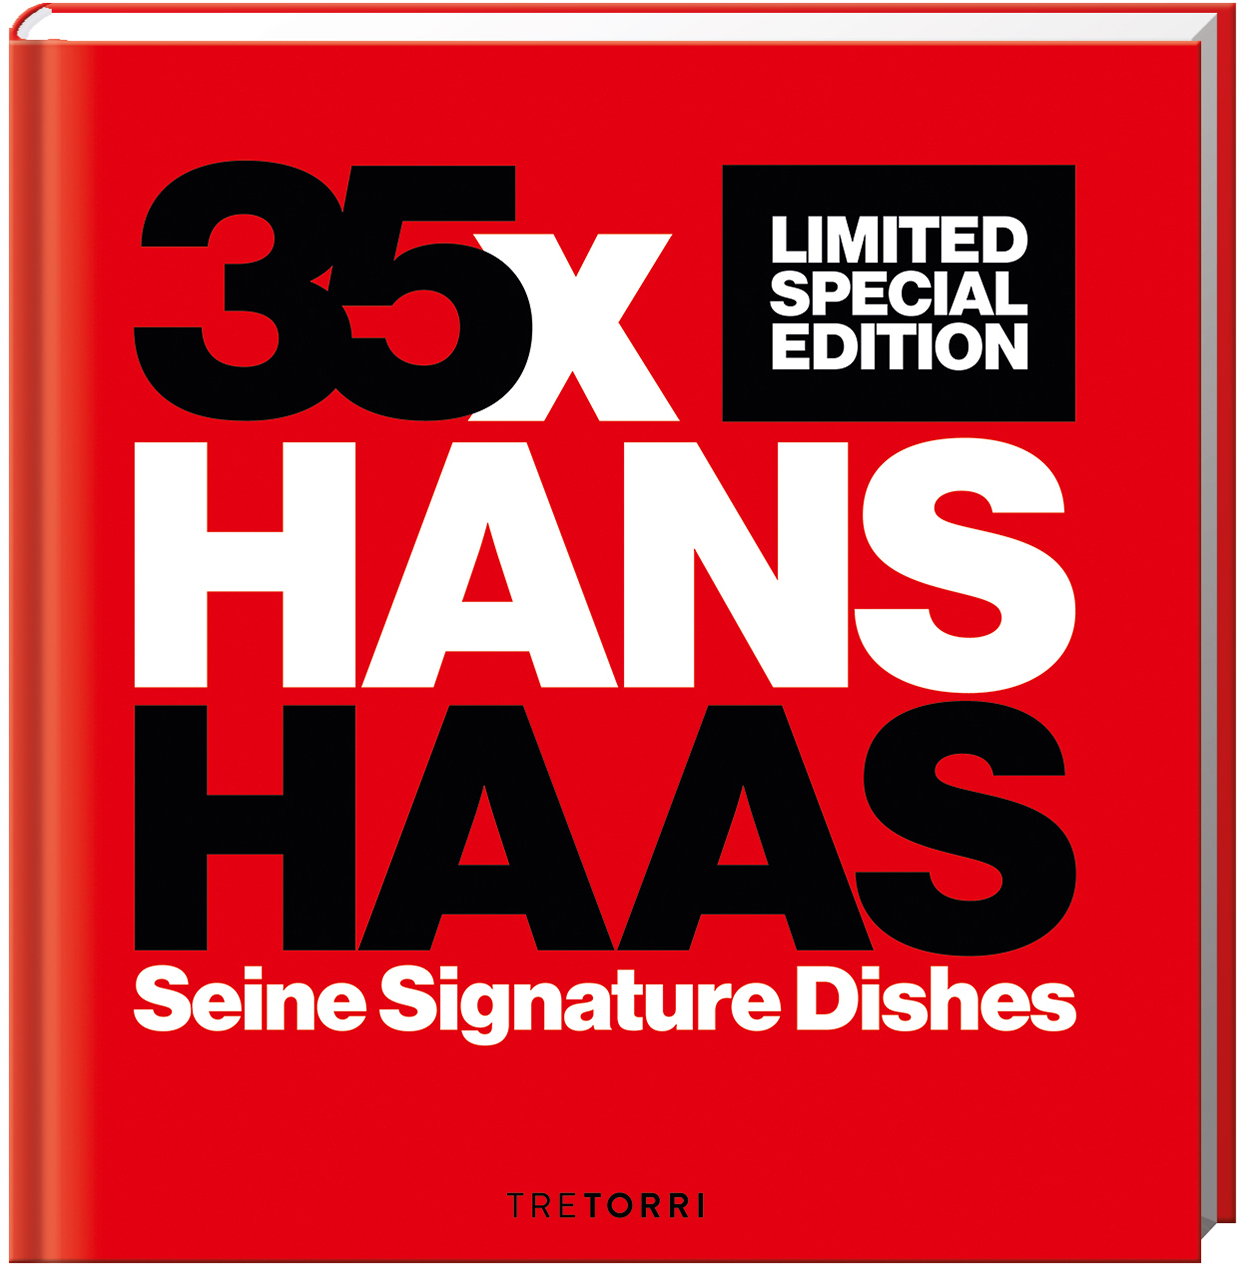 HANS HAAS - Limited Special Edition